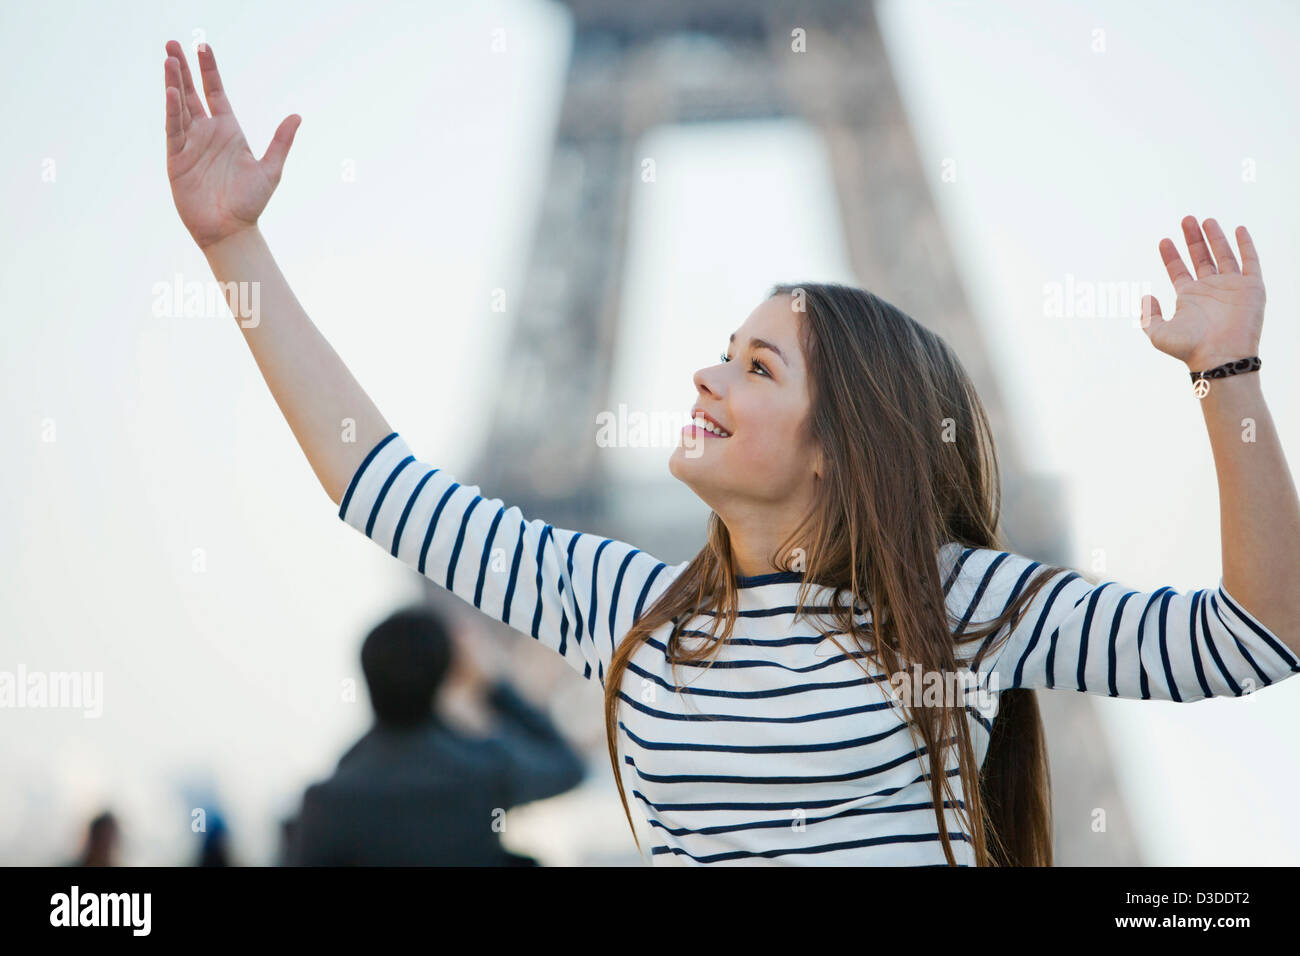 Woman looking excited with her arms raised Stock Photo